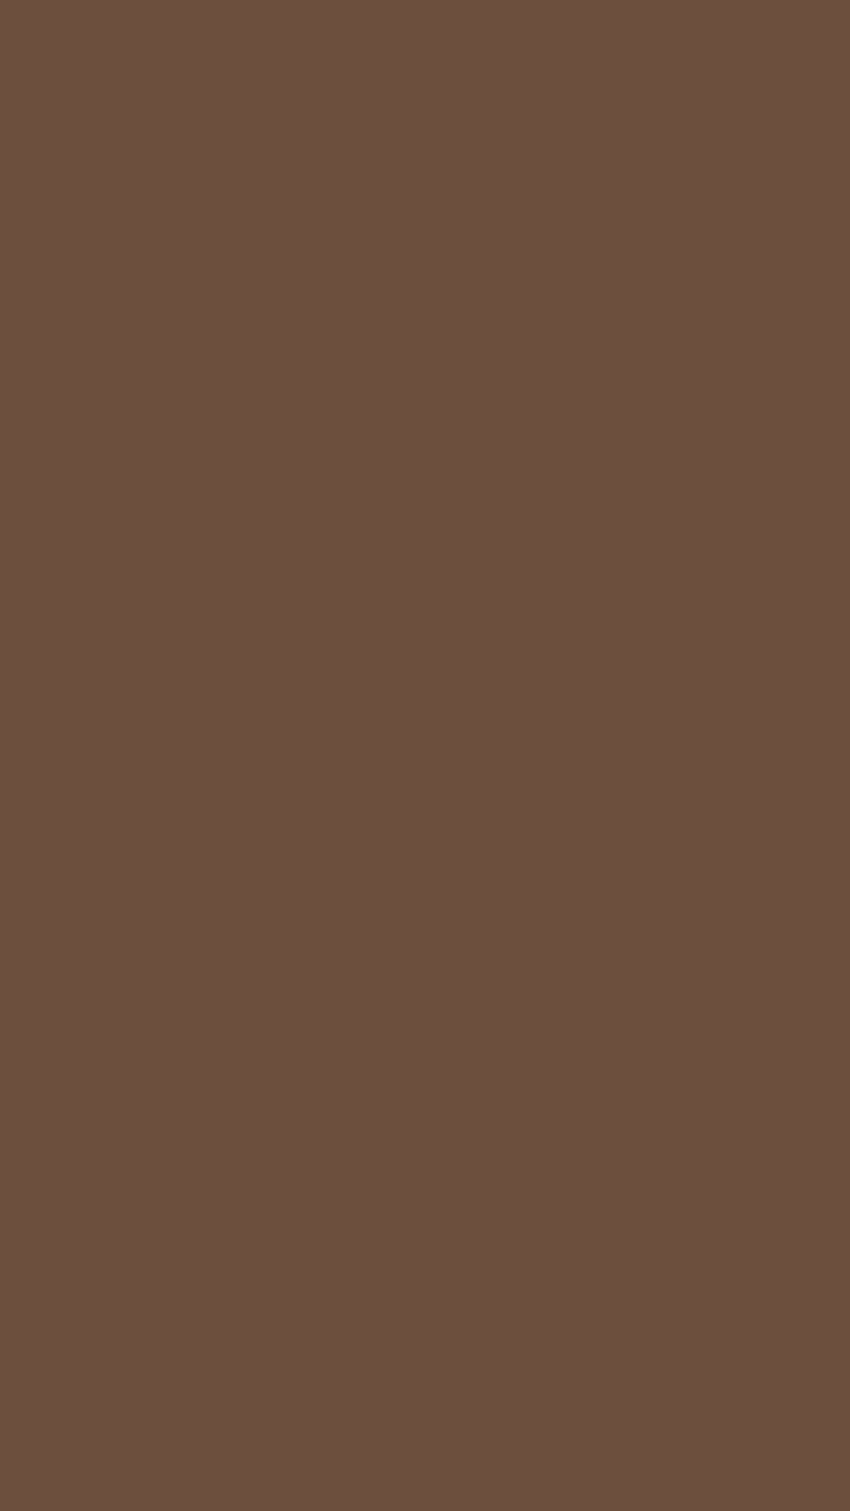 Free Photo  Abstract luxury plain dark brown and brown wallpaper  background used for vignette frames presentations studio backgrounds boards  laminate for furniture and floor tiles